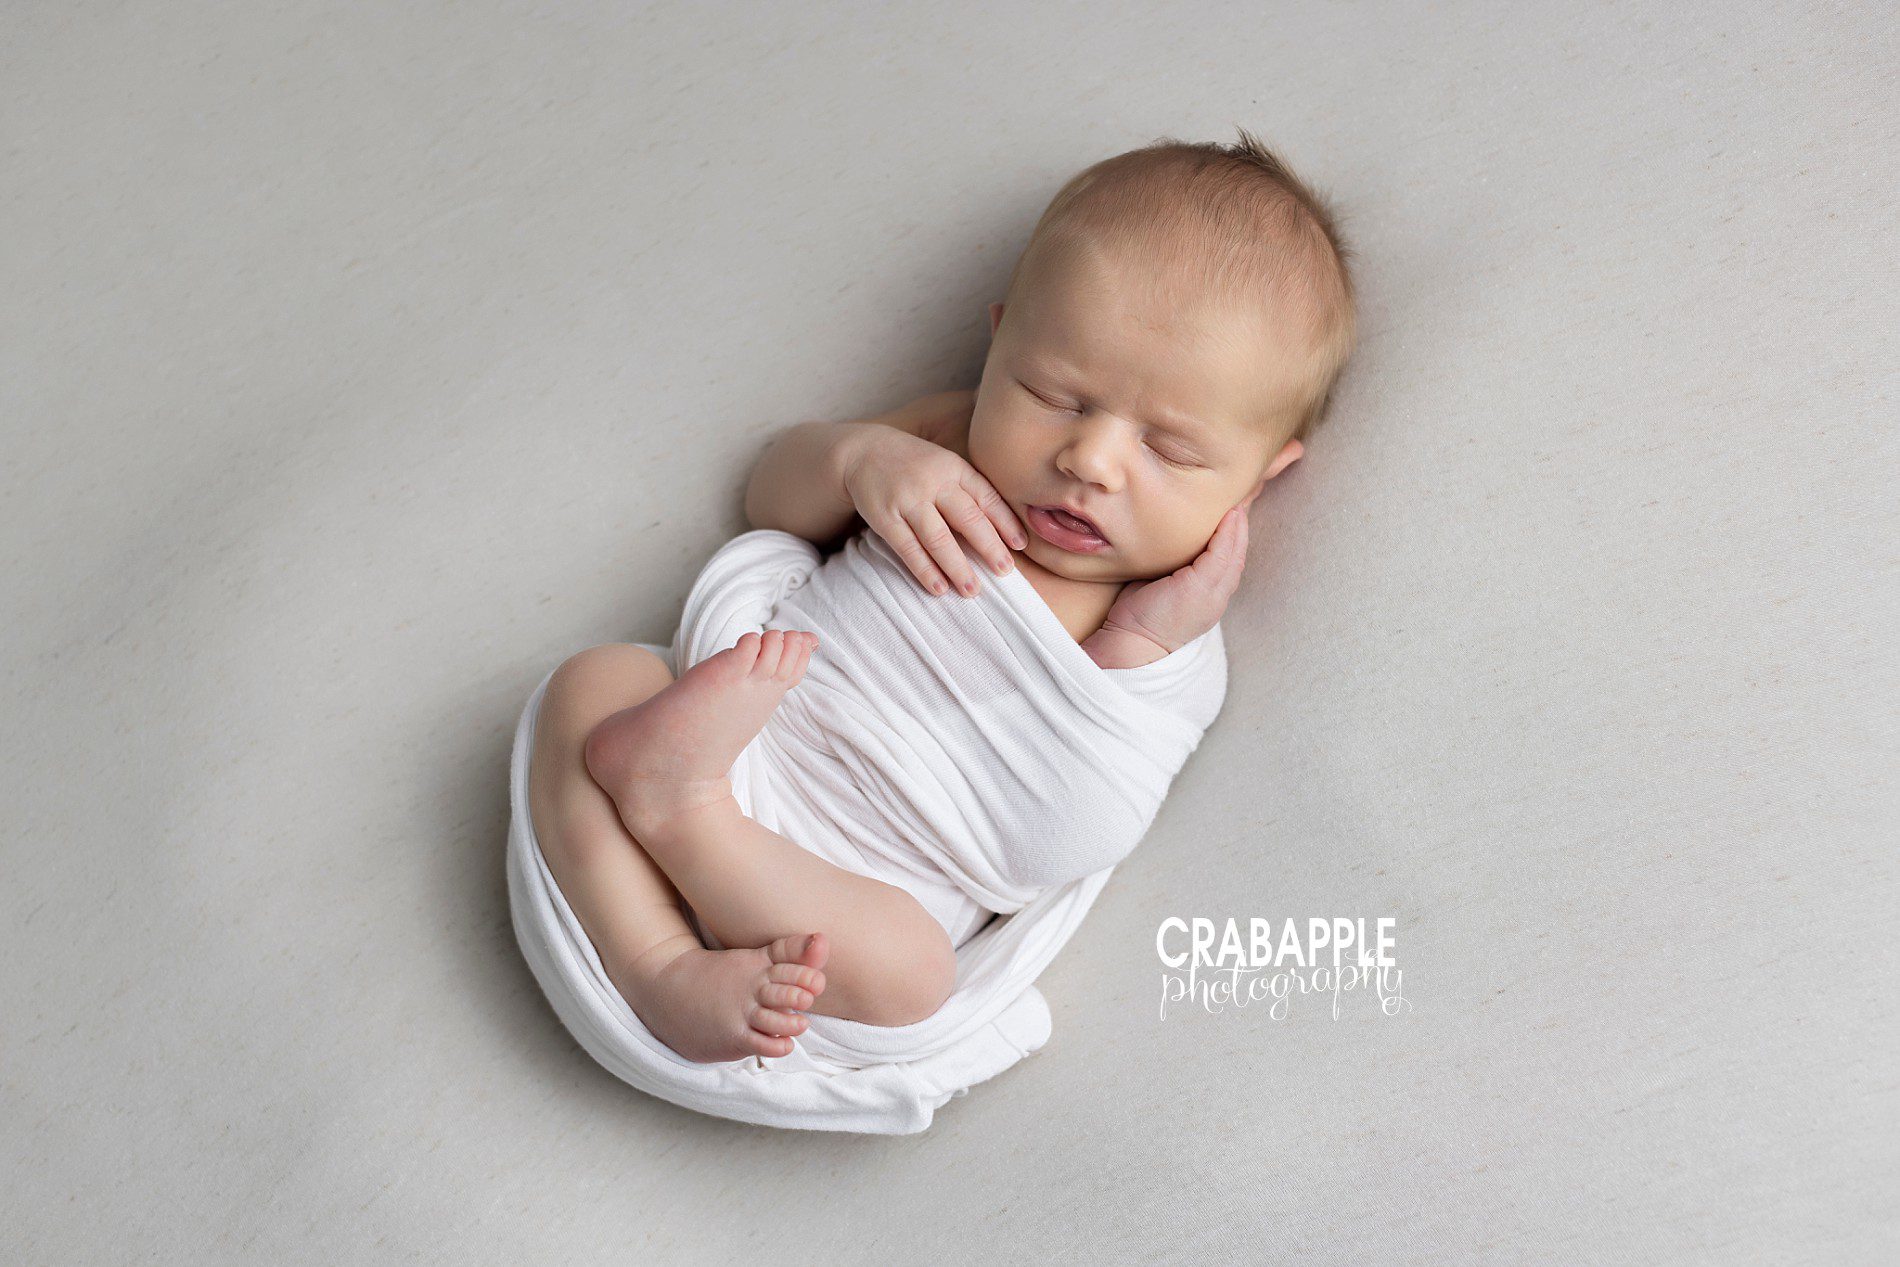 sweet simple and clean newborn photo ideas